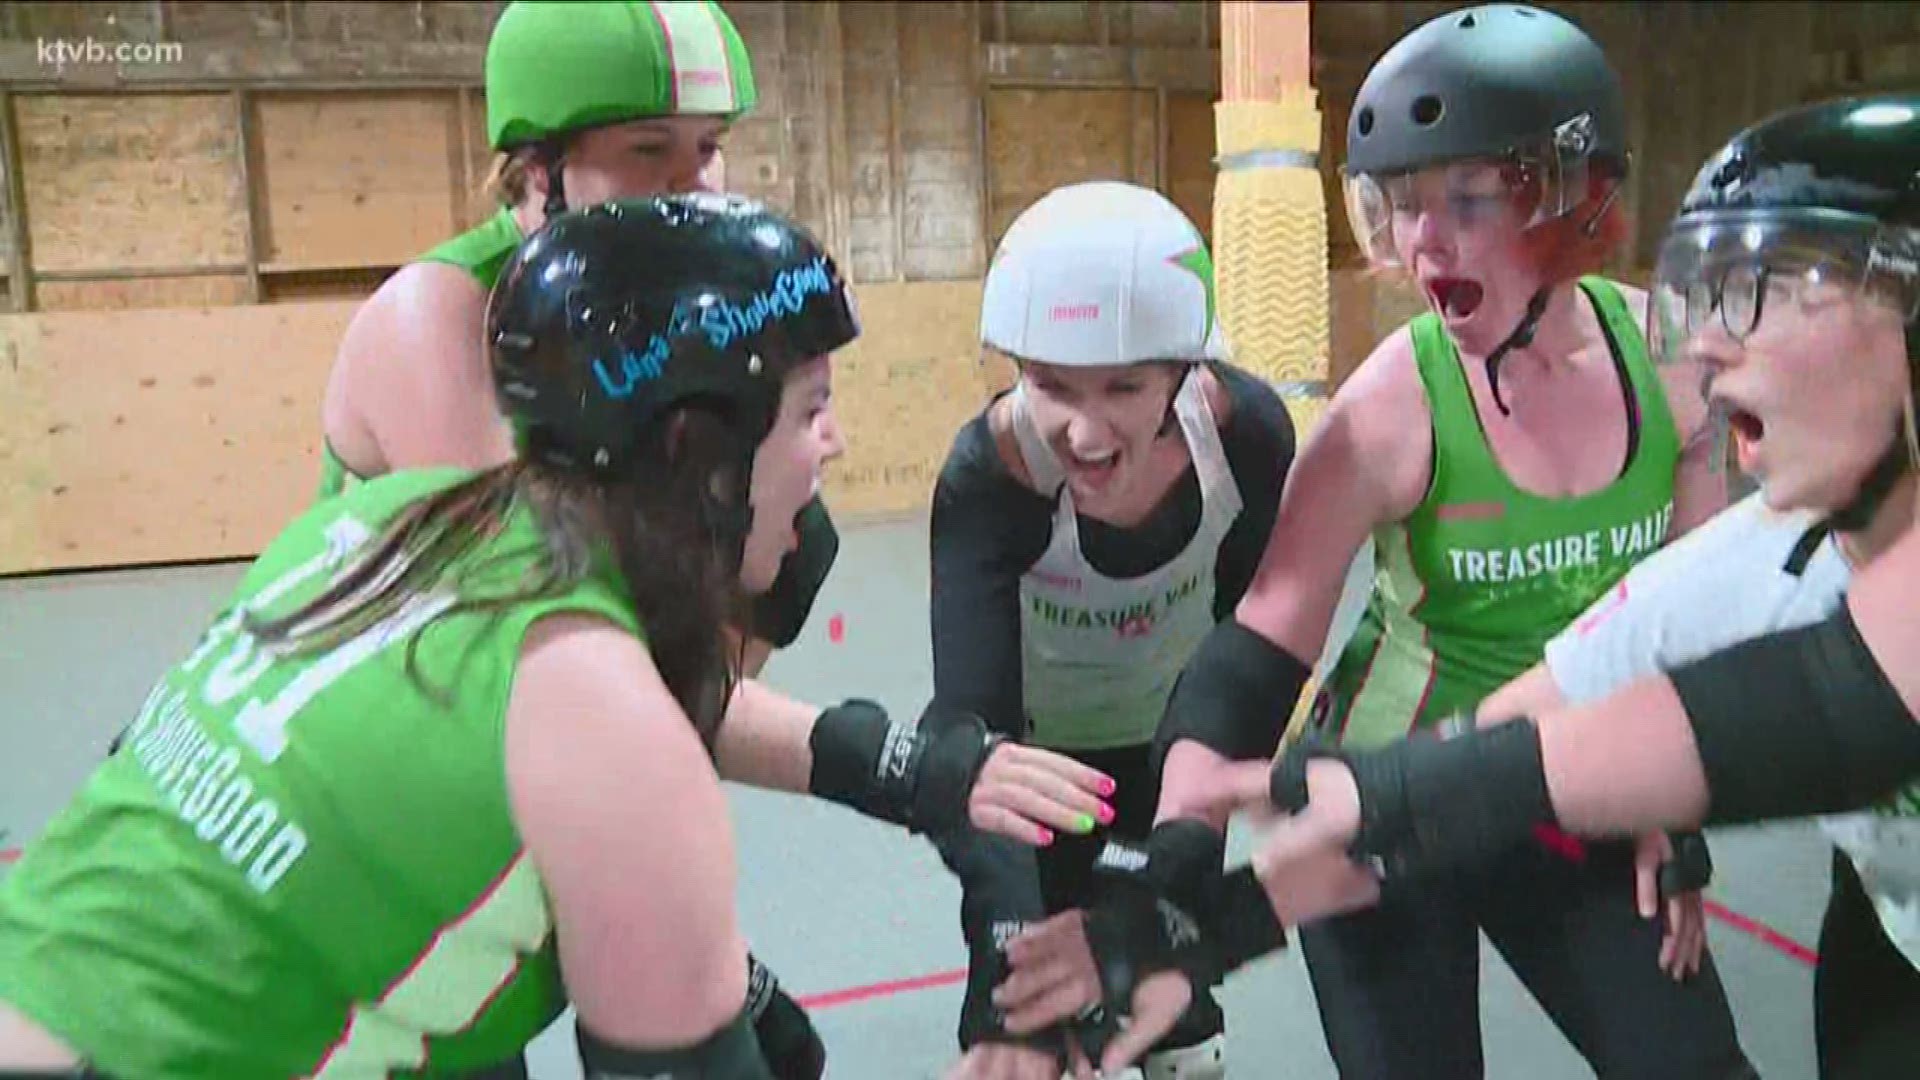 The Treasure Valley Roller Derby is launching its 13th season. KTVB photojournalist Troy Colson caught up with the team during practice on Friday, February 15, 2019, in Meridian.